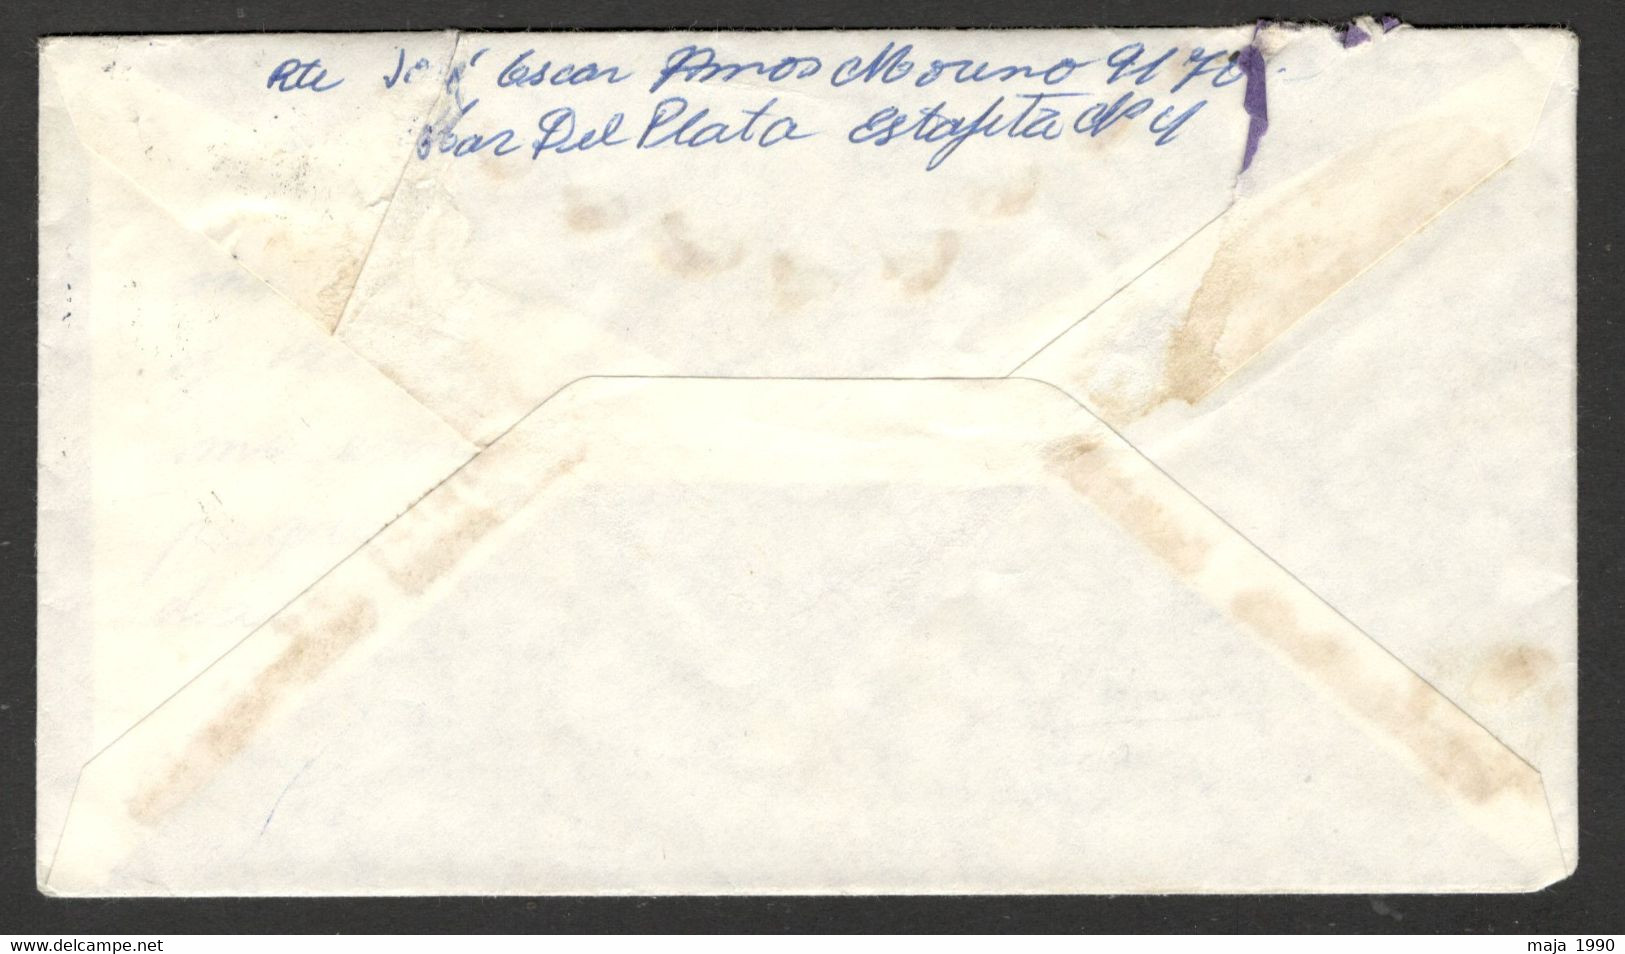 ARGENTINA - REGISTERED LETTER - 1969. - Covers & Documents